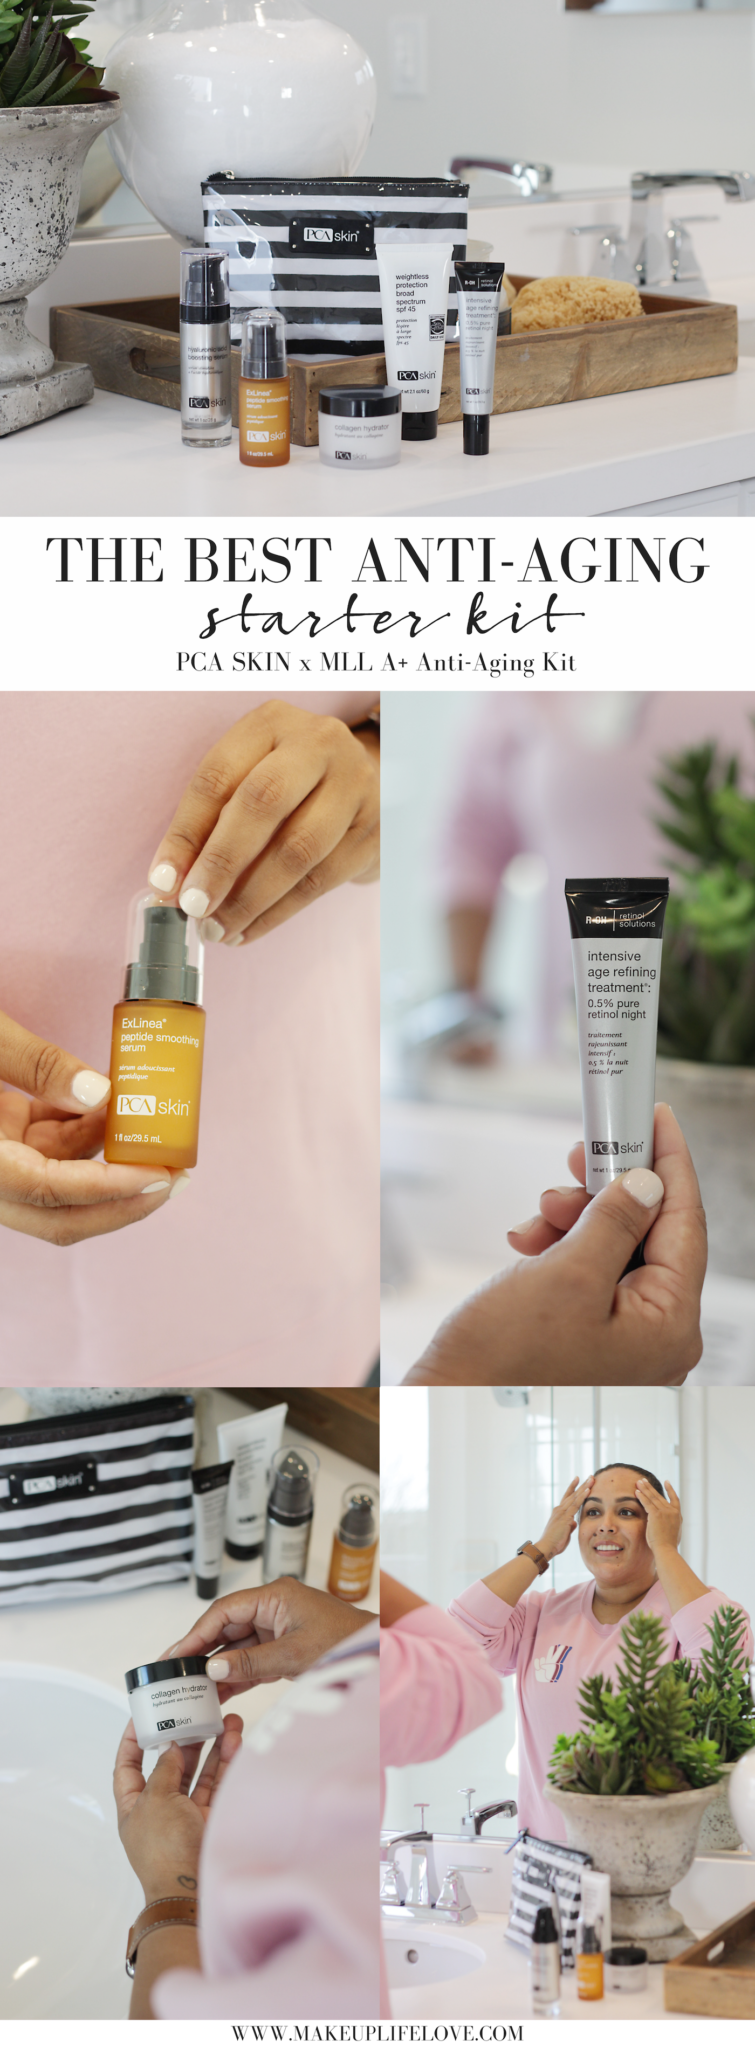 Looking to upgrade your anti-aging routine? Los Angeles Skincare Blogger Makeup Life and Love partnered with PCA Skin to bring you the best anti-aging starter kit ever! See it HERE!!